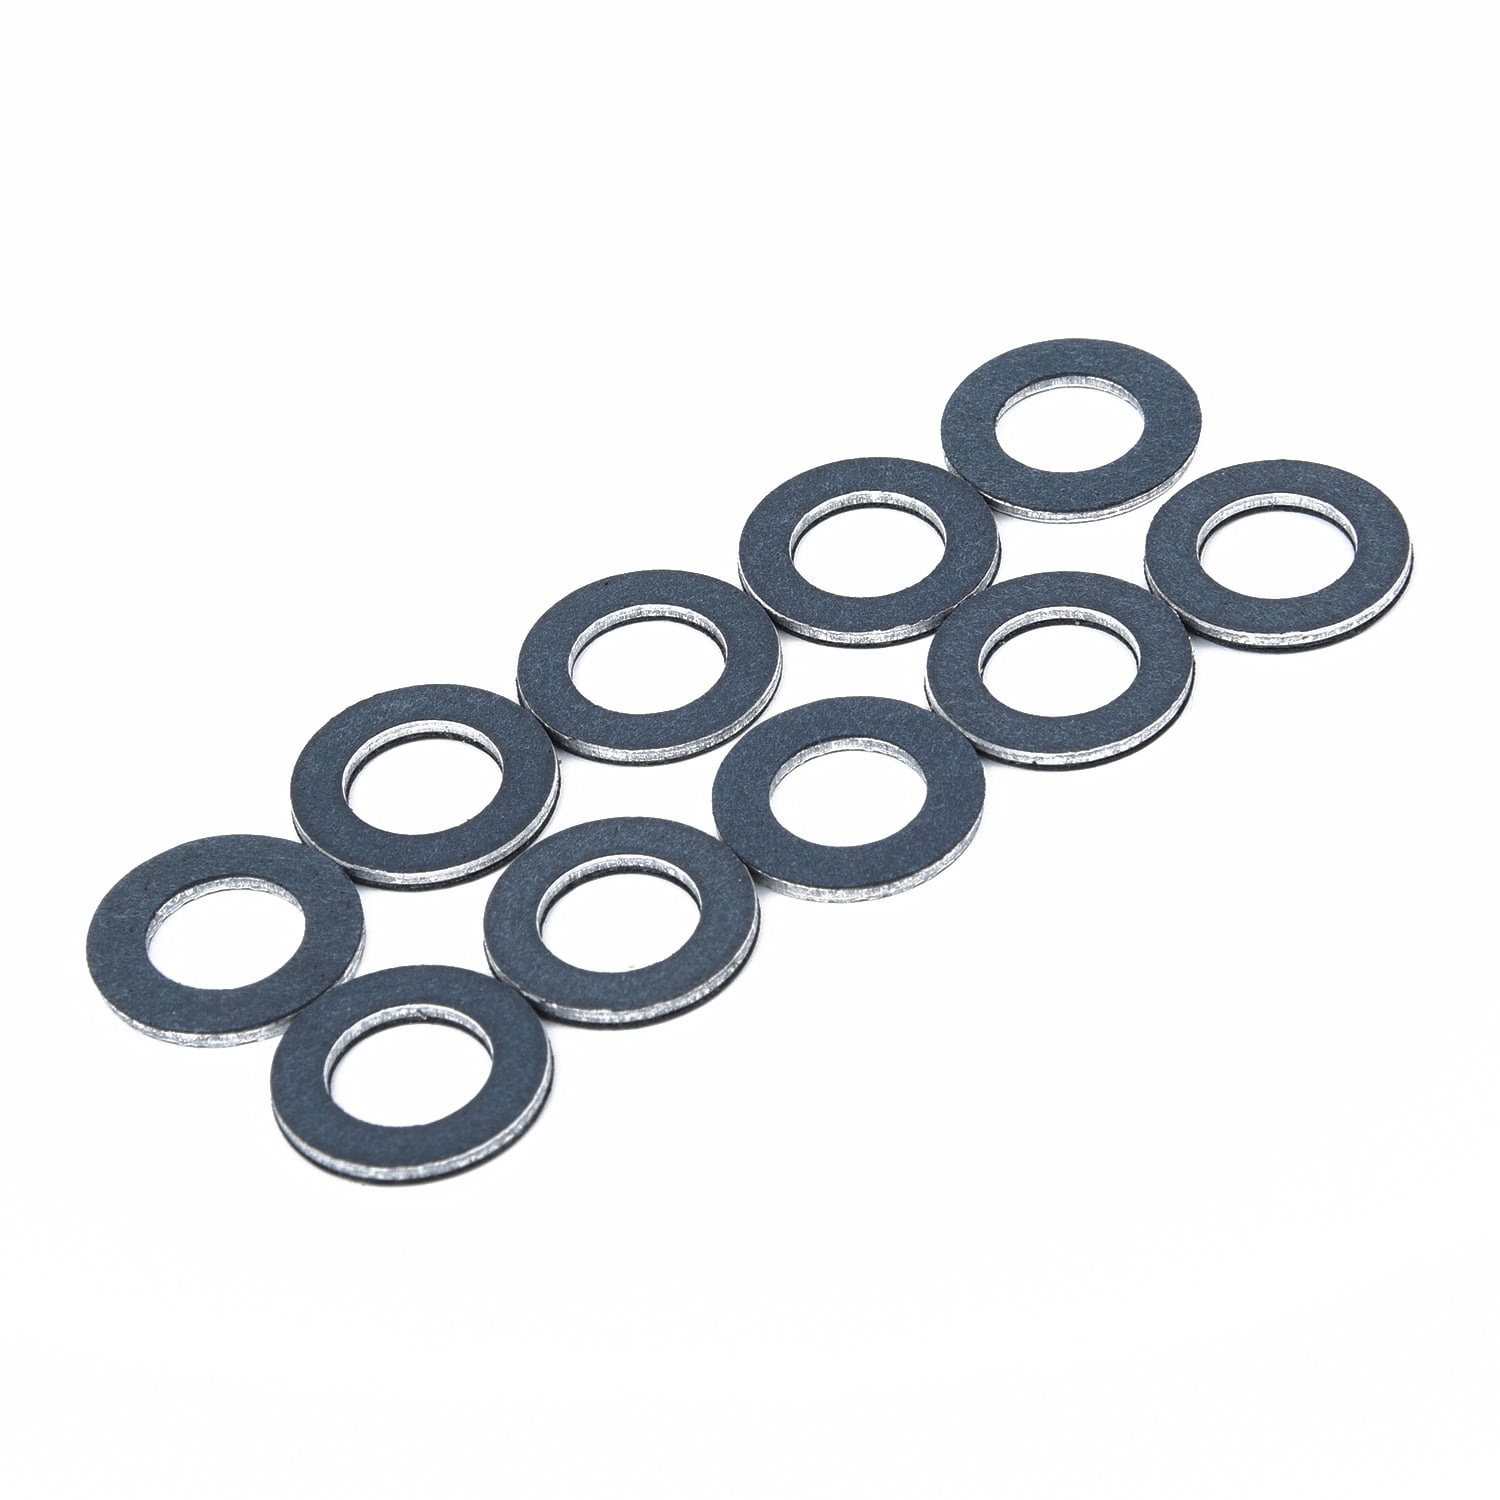 Prime Ave Aluminum Oil Drain Plug Washer Gaskets For Toyota Lexus Scion Part# Pack of 10 90430-12031 